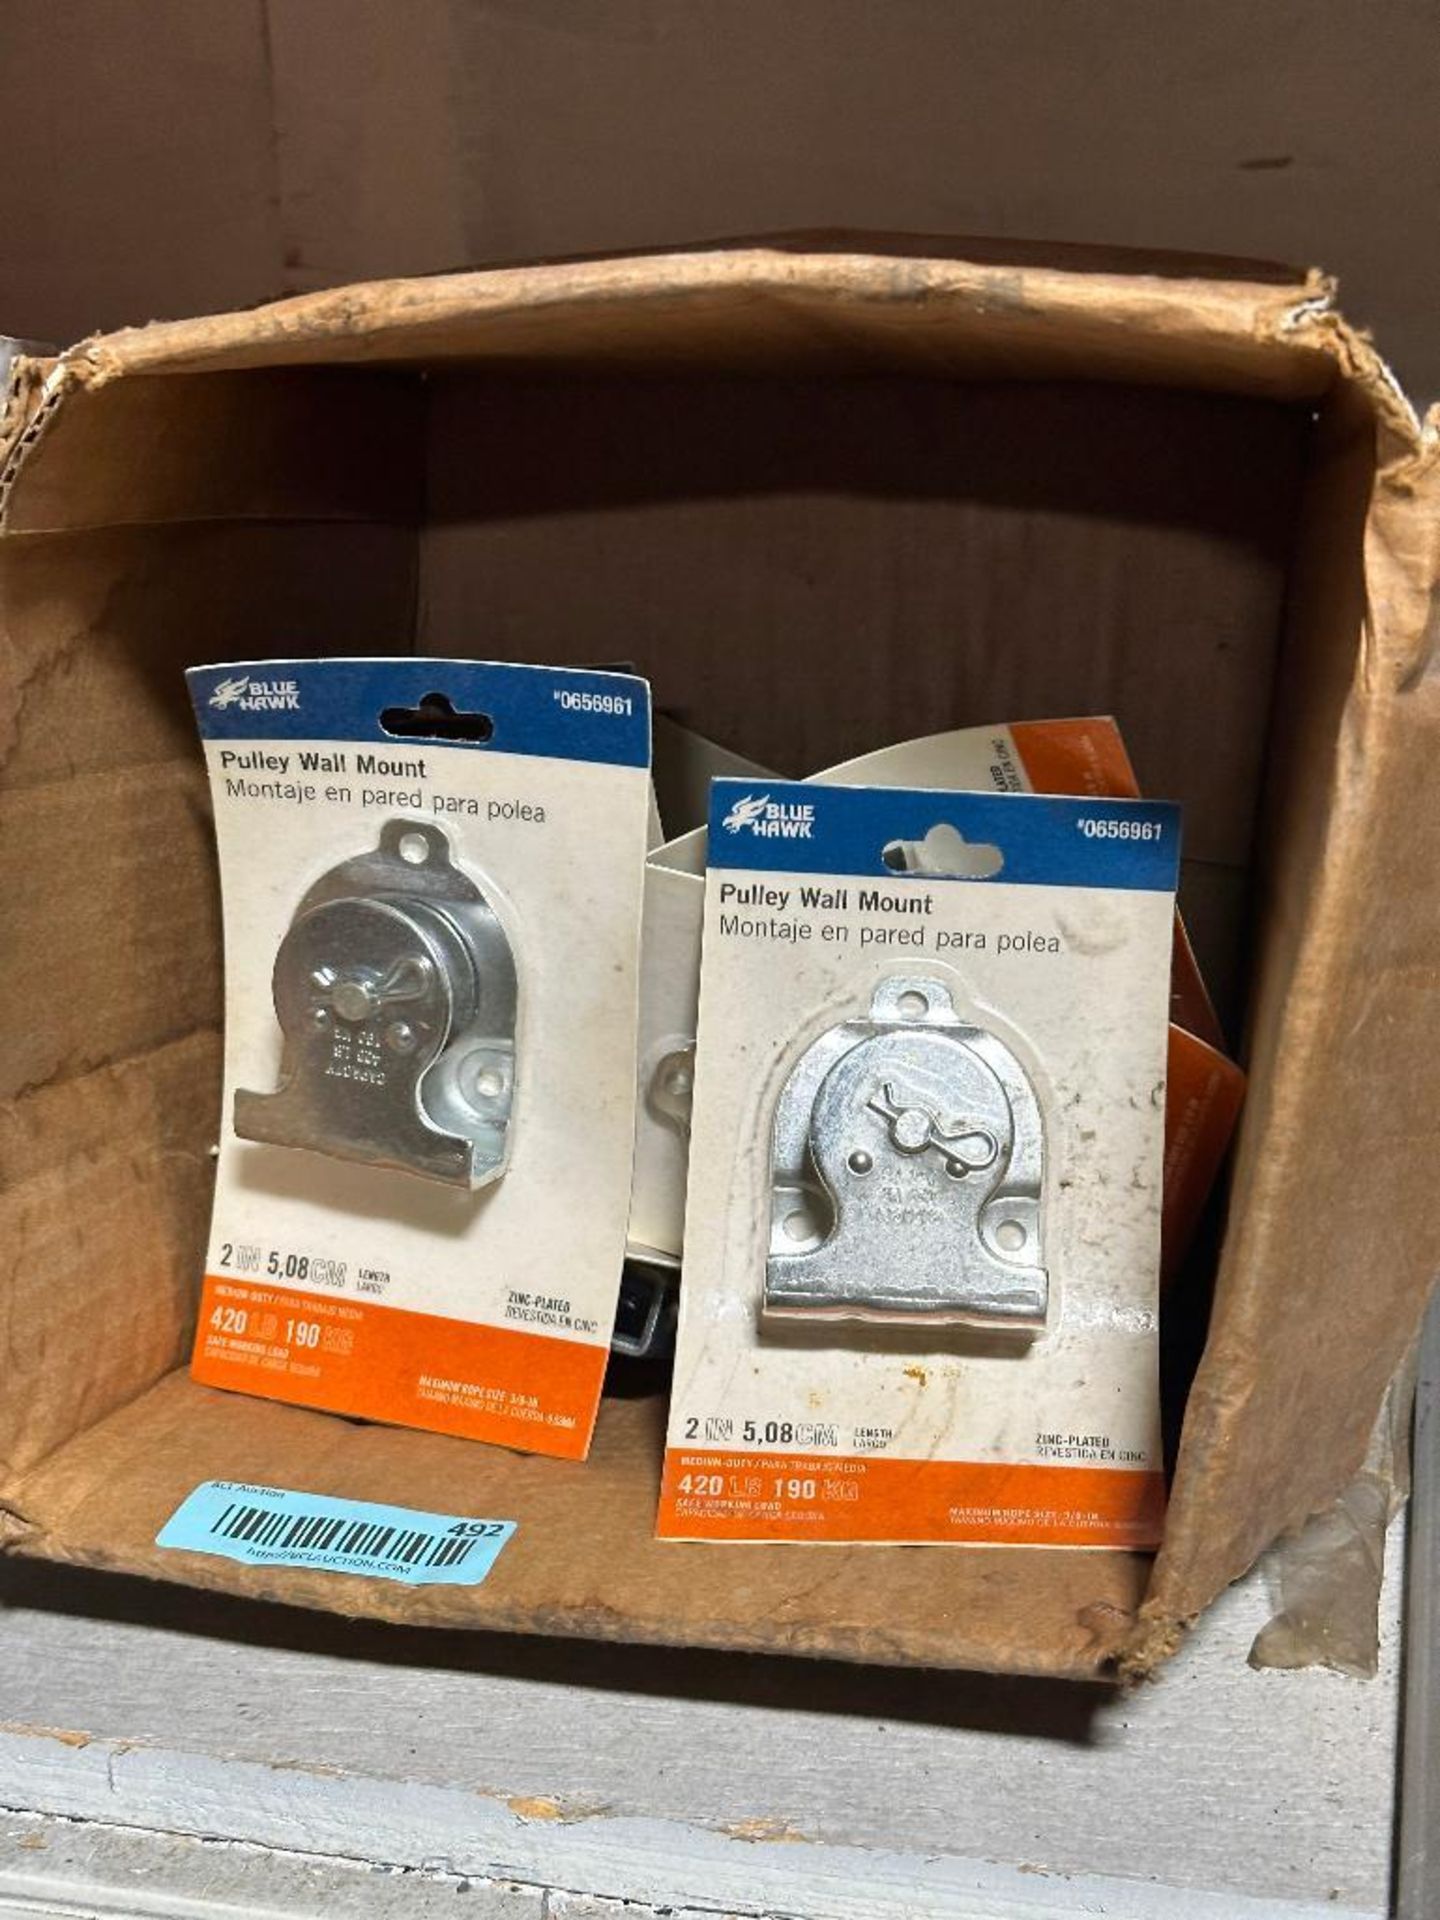 BOX OF PULLEY WALL MOUNTS